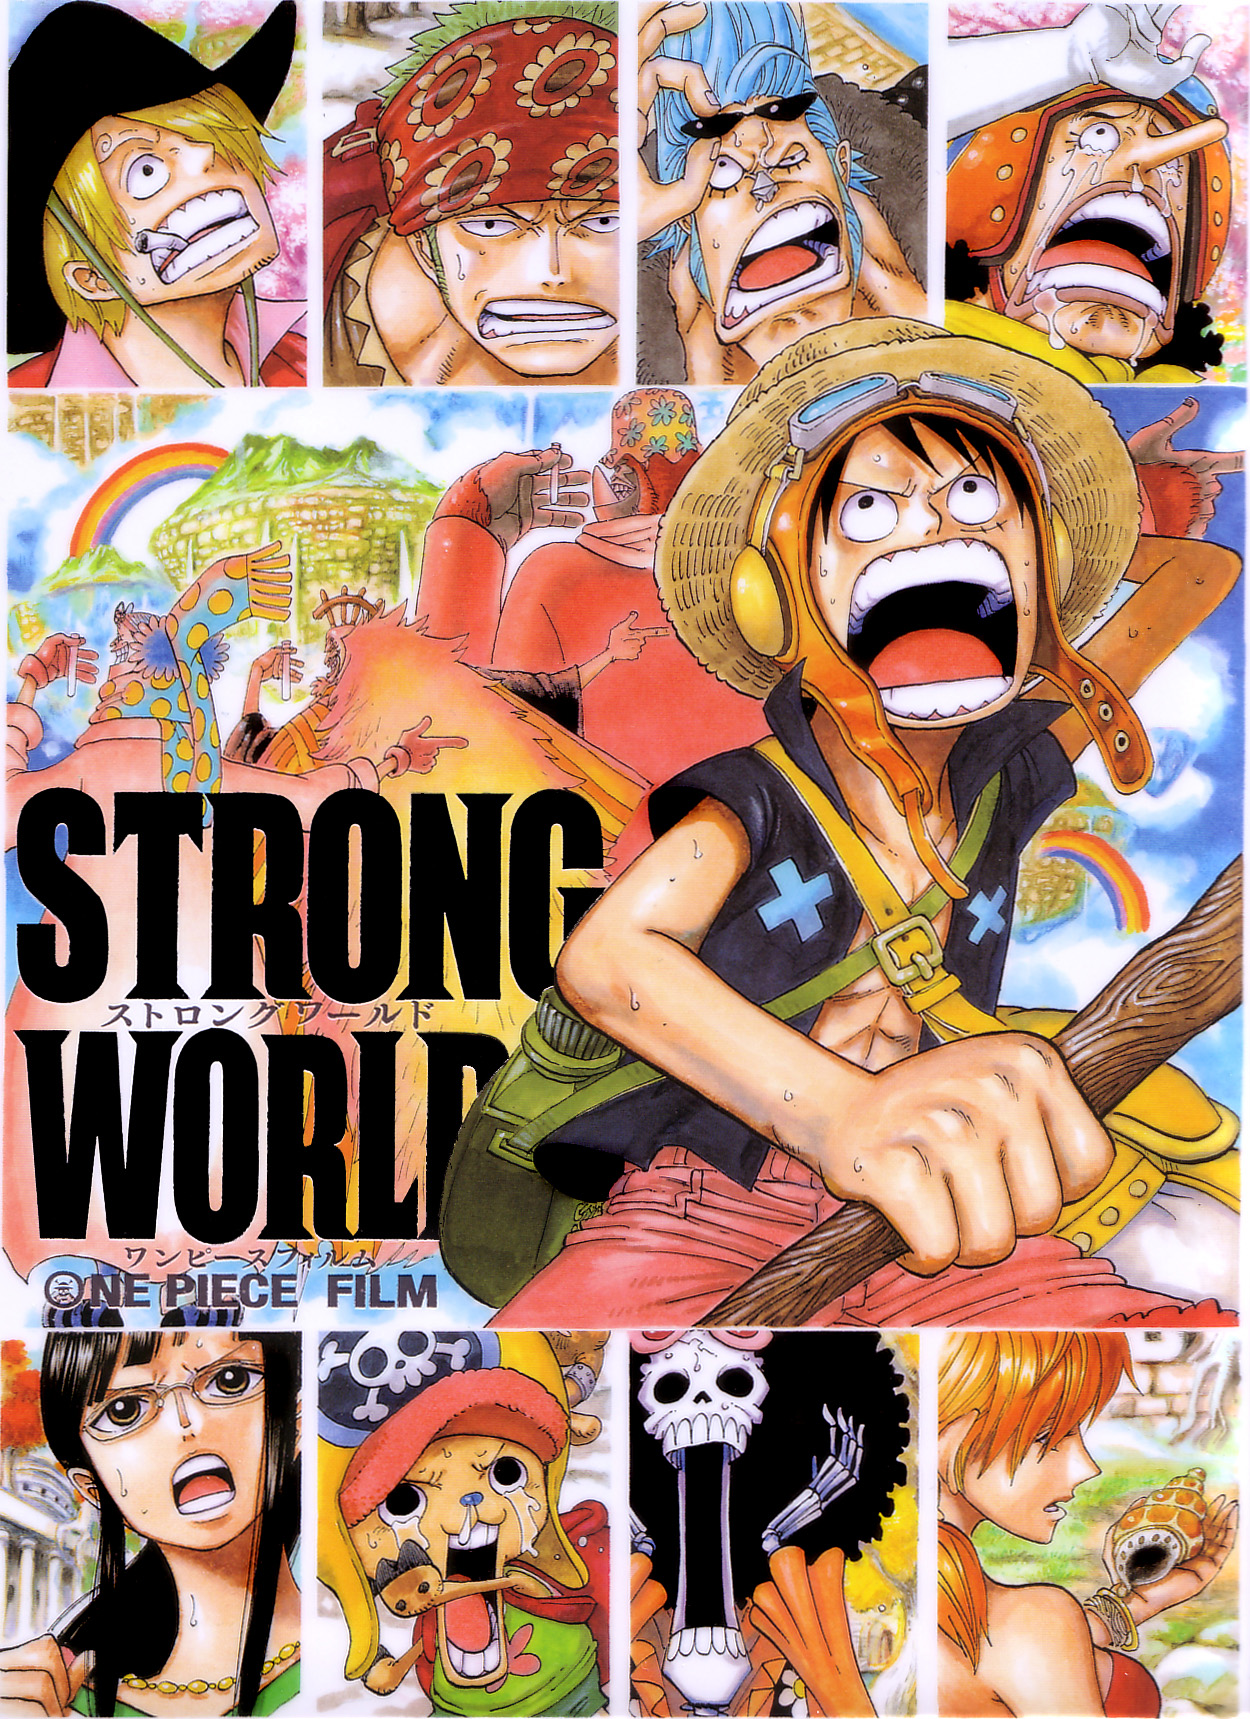 One piece all episode download